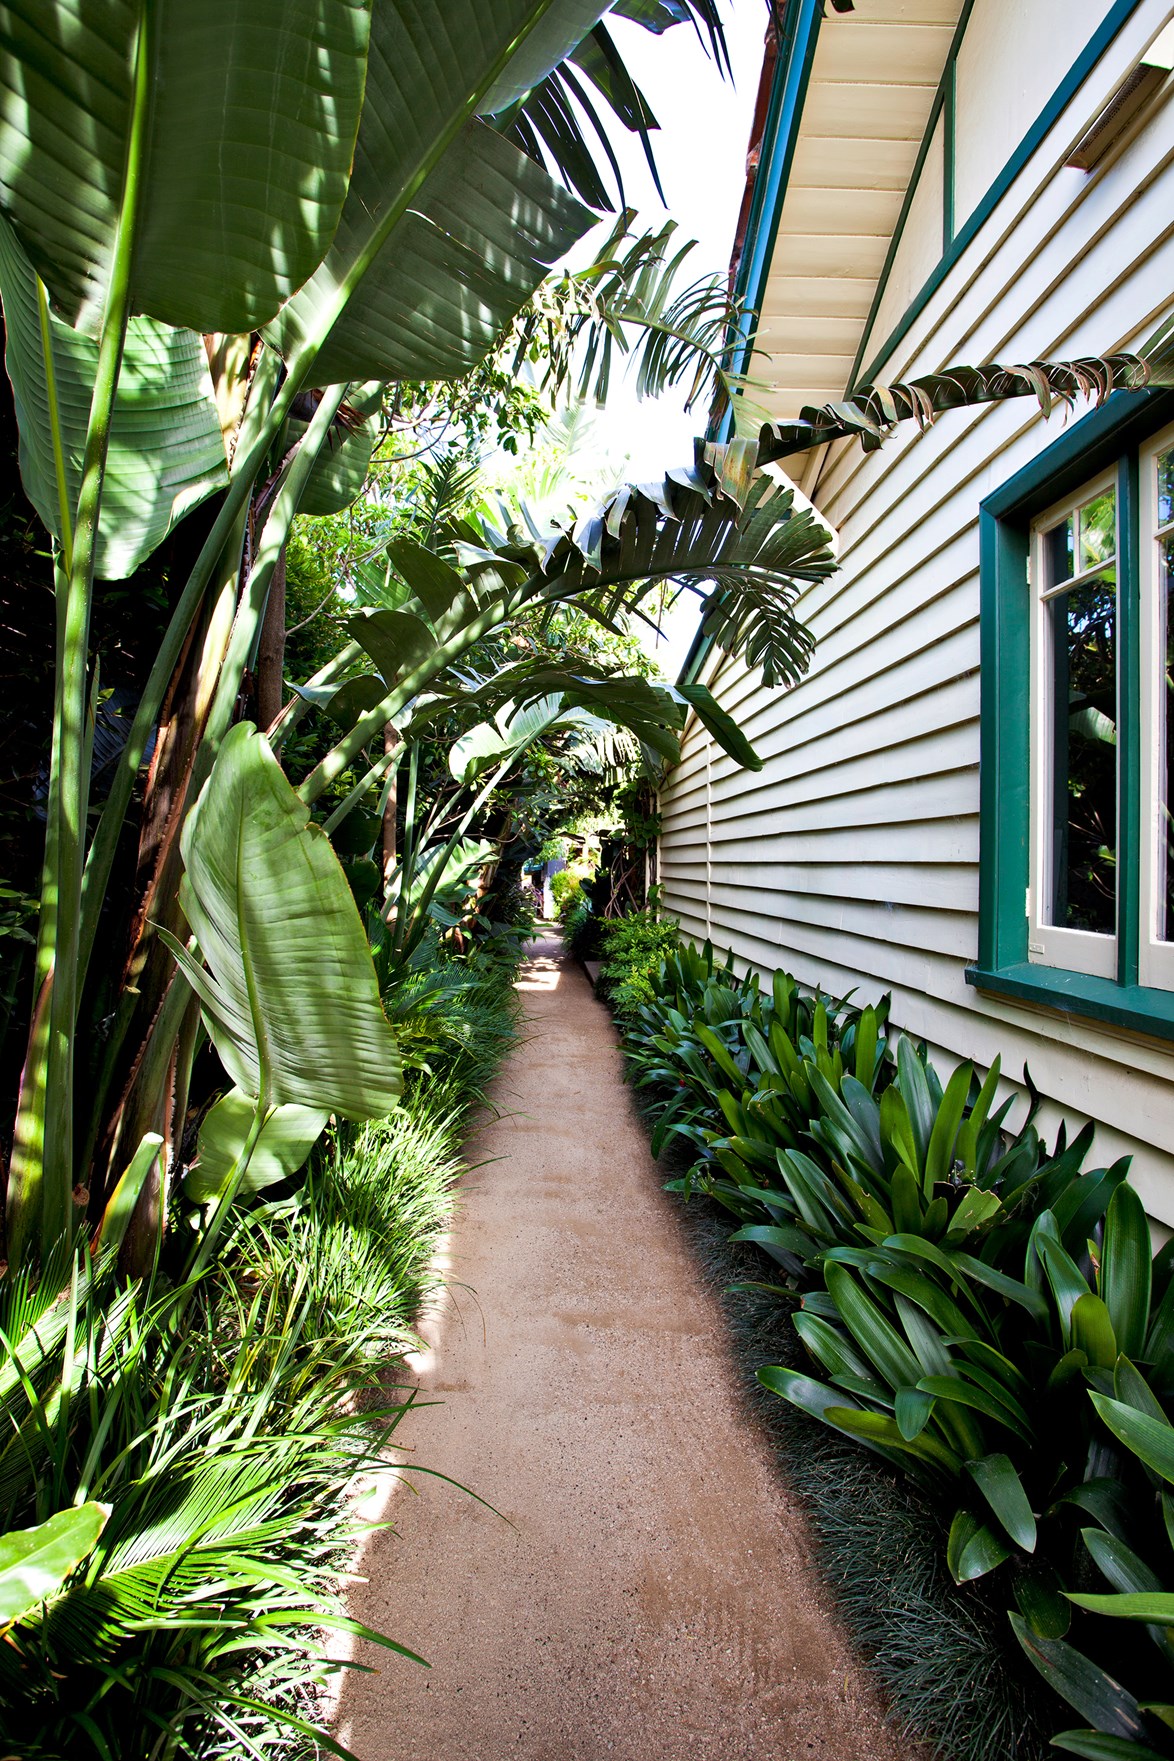 <p>**SIDE GARDEN**<p>
<P>So you're all business in the front and party in the back … but what about your side garden? Even if the sides of your home are shrouded in shade, it doesn't mean you can't liven things up with a little lovely leafiness. In smaller spaces, consider going vertical. In wider walkways, start with a few good structural shade loving plants (agave or agapanthus are a good choice here), some stepping stones and a [fast-growing groundcover](https://www.homestolove.com.au/a-guide-to-groundcovers-3632|target="_blank"). Here are [6 stunning side garden ideas](https://www.homestolove.com.au/side-garden-ideas-6803|target="_blank") to inspire.<p>
<p>*Photo: Claire Takacs / Story: Australian House & Garden*<P>